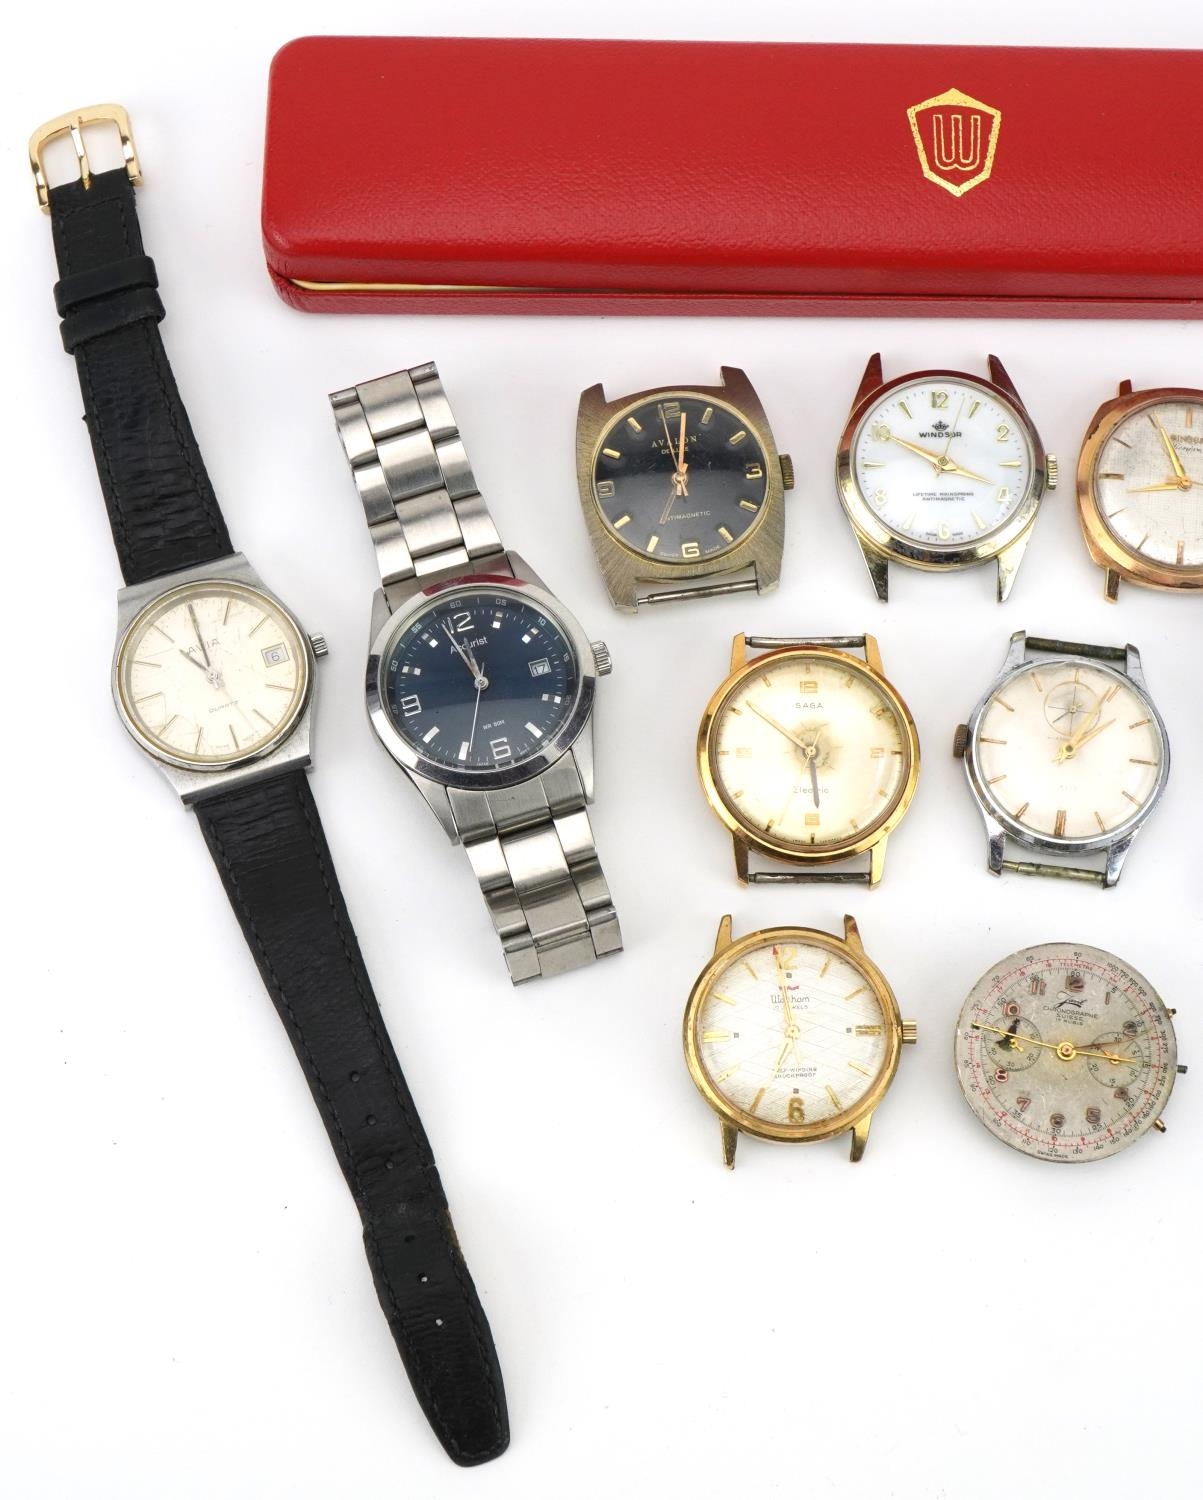 Eleven vintage gentlemen's wristwatches including Waltham, Singer, Avia, Accurist and Saga Electric, - Image 2 of 3